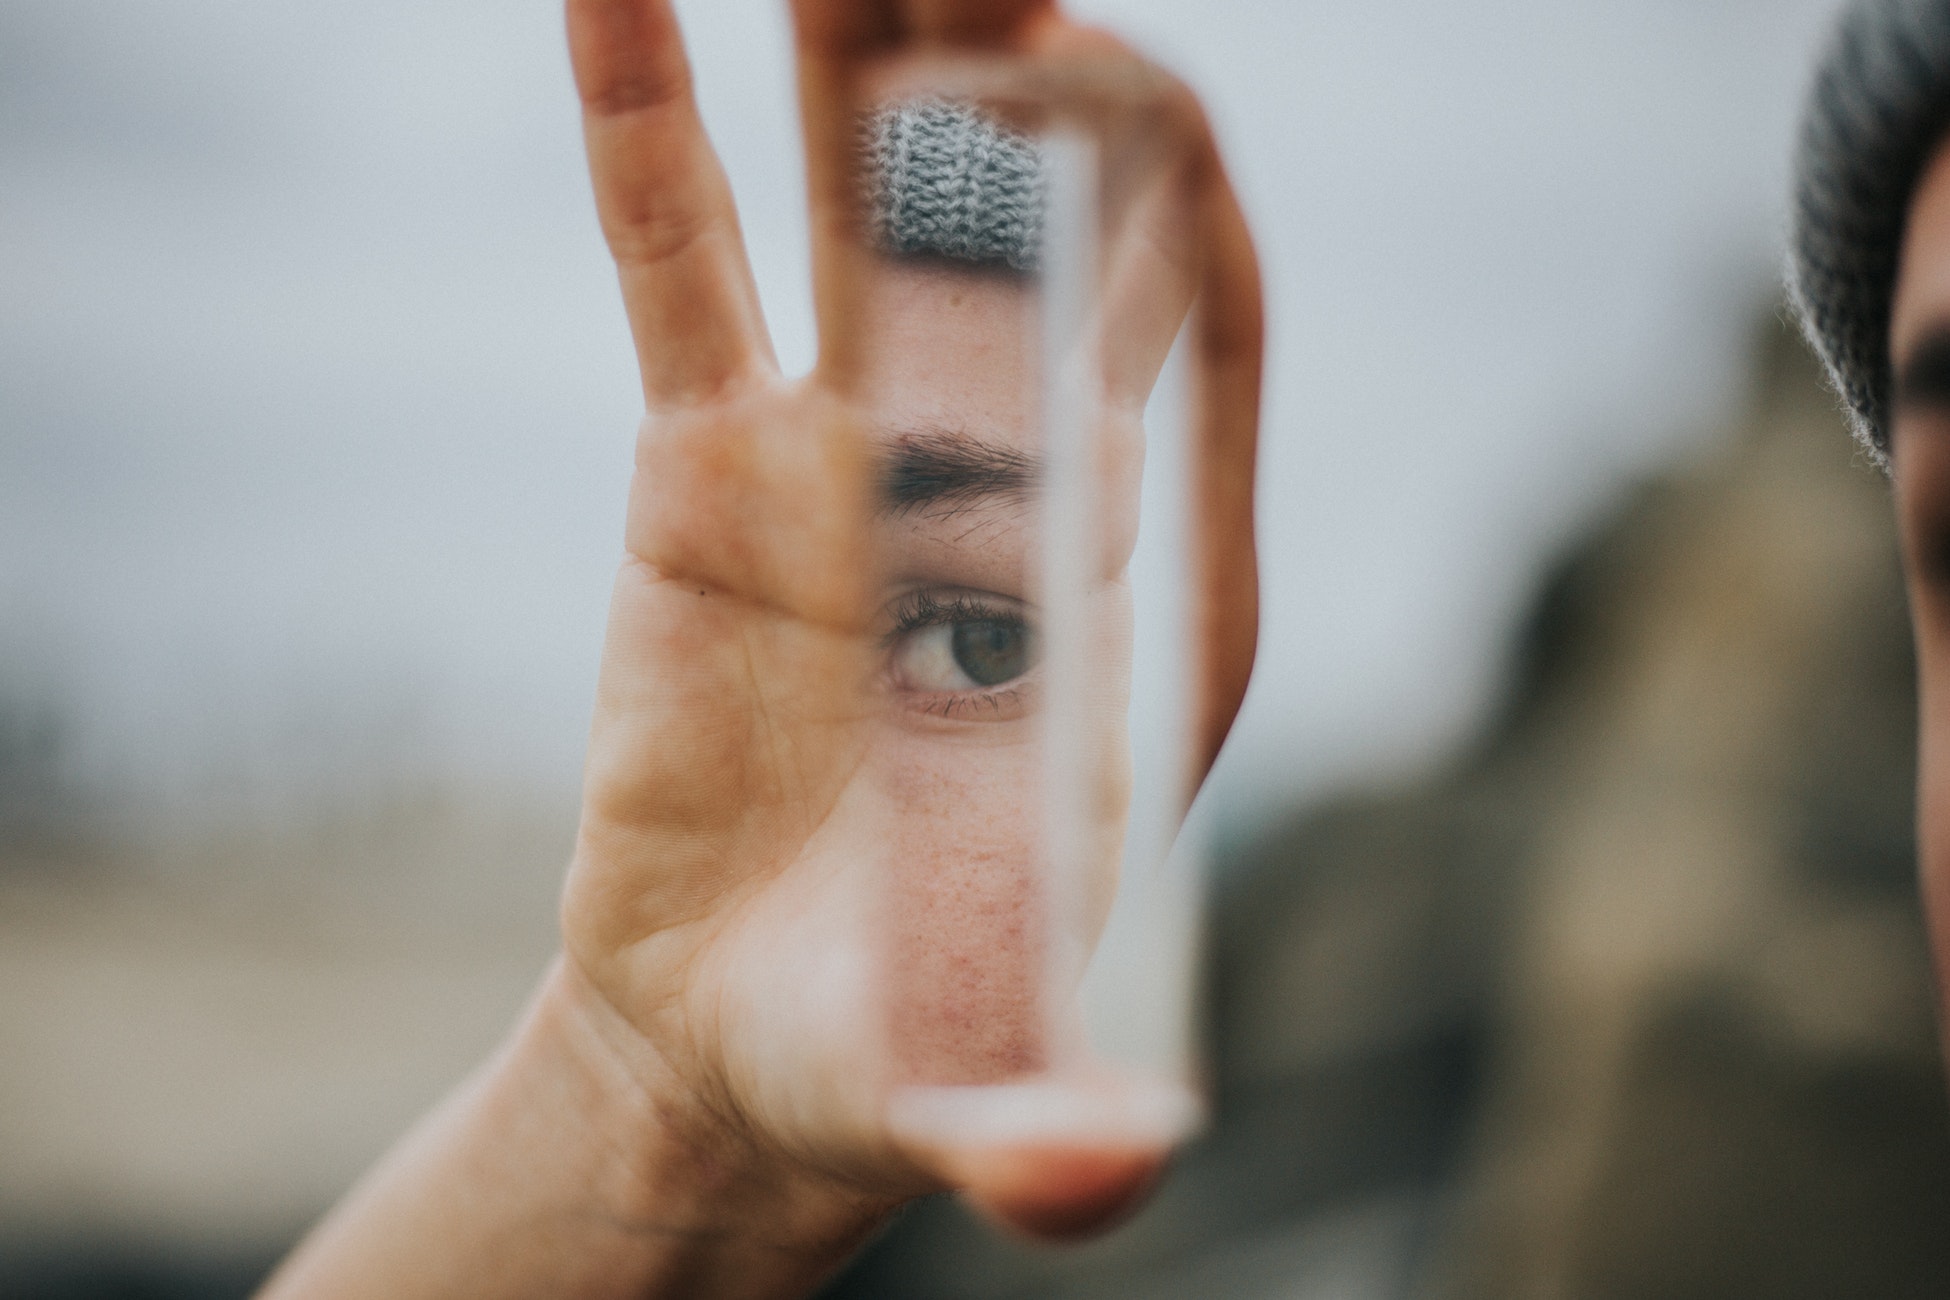 A person holds a piece of glass up which reflects their face in it.